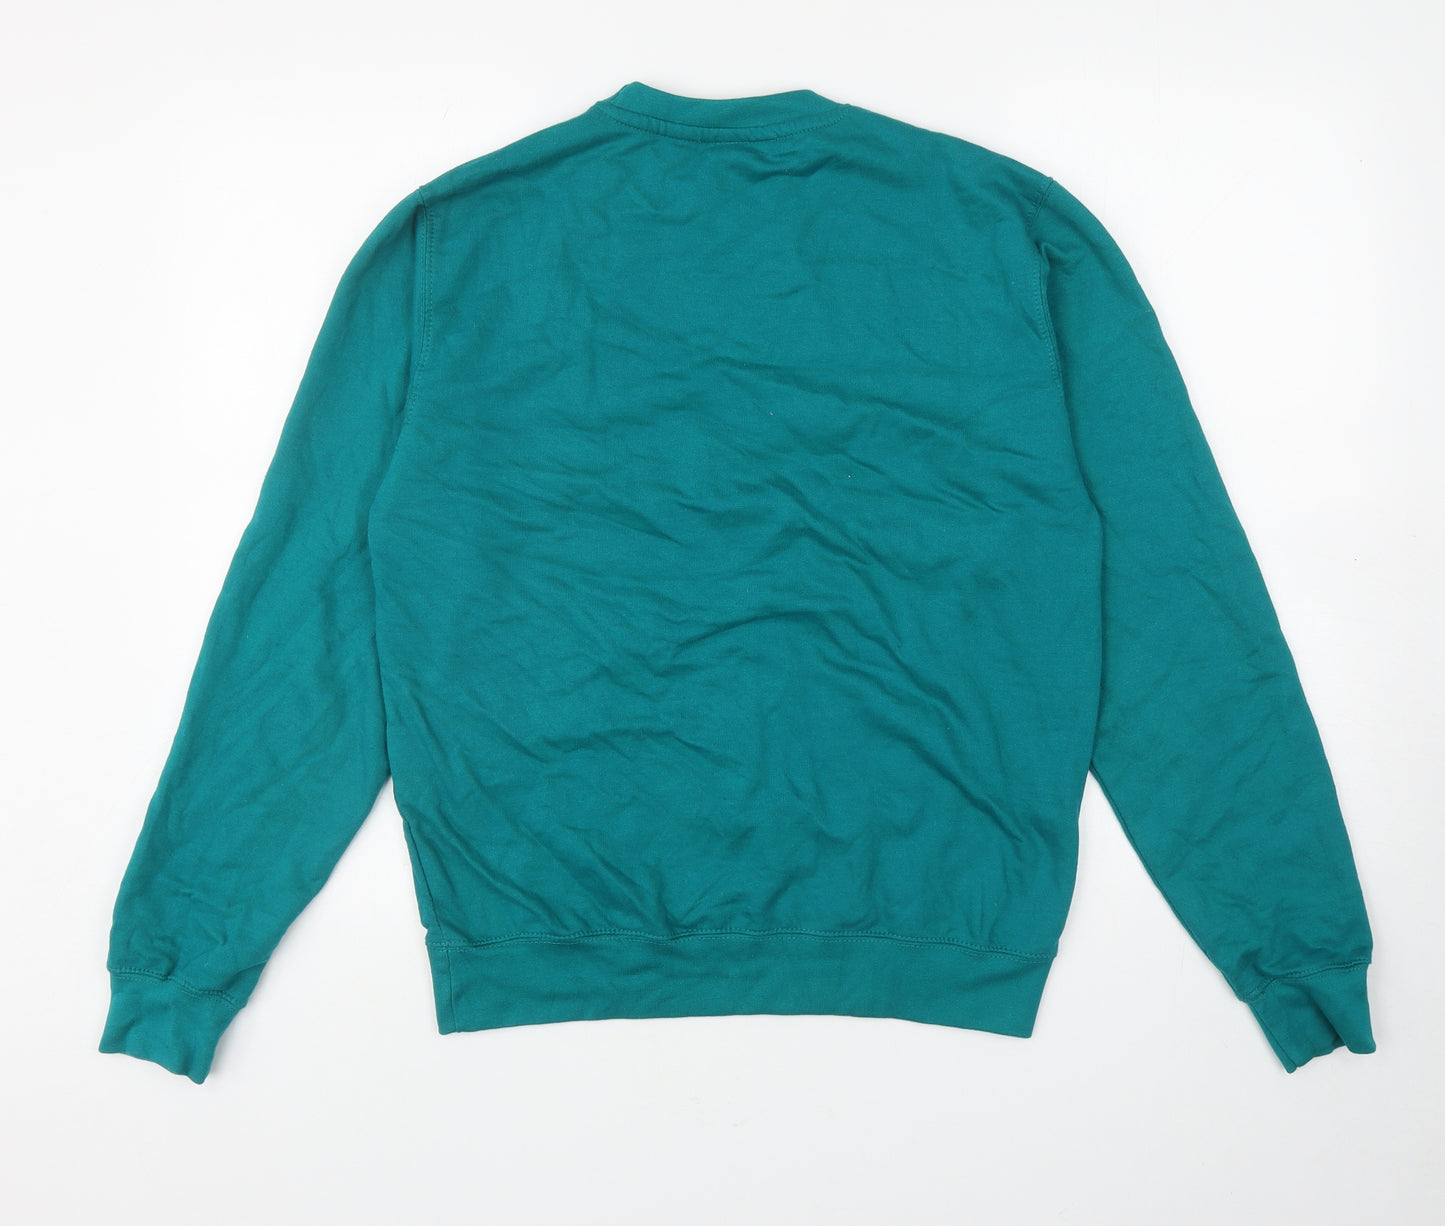 All We Do is Boys Green Cotton Pullover Sweatshirt Size S Pullover - Isle Of Arran